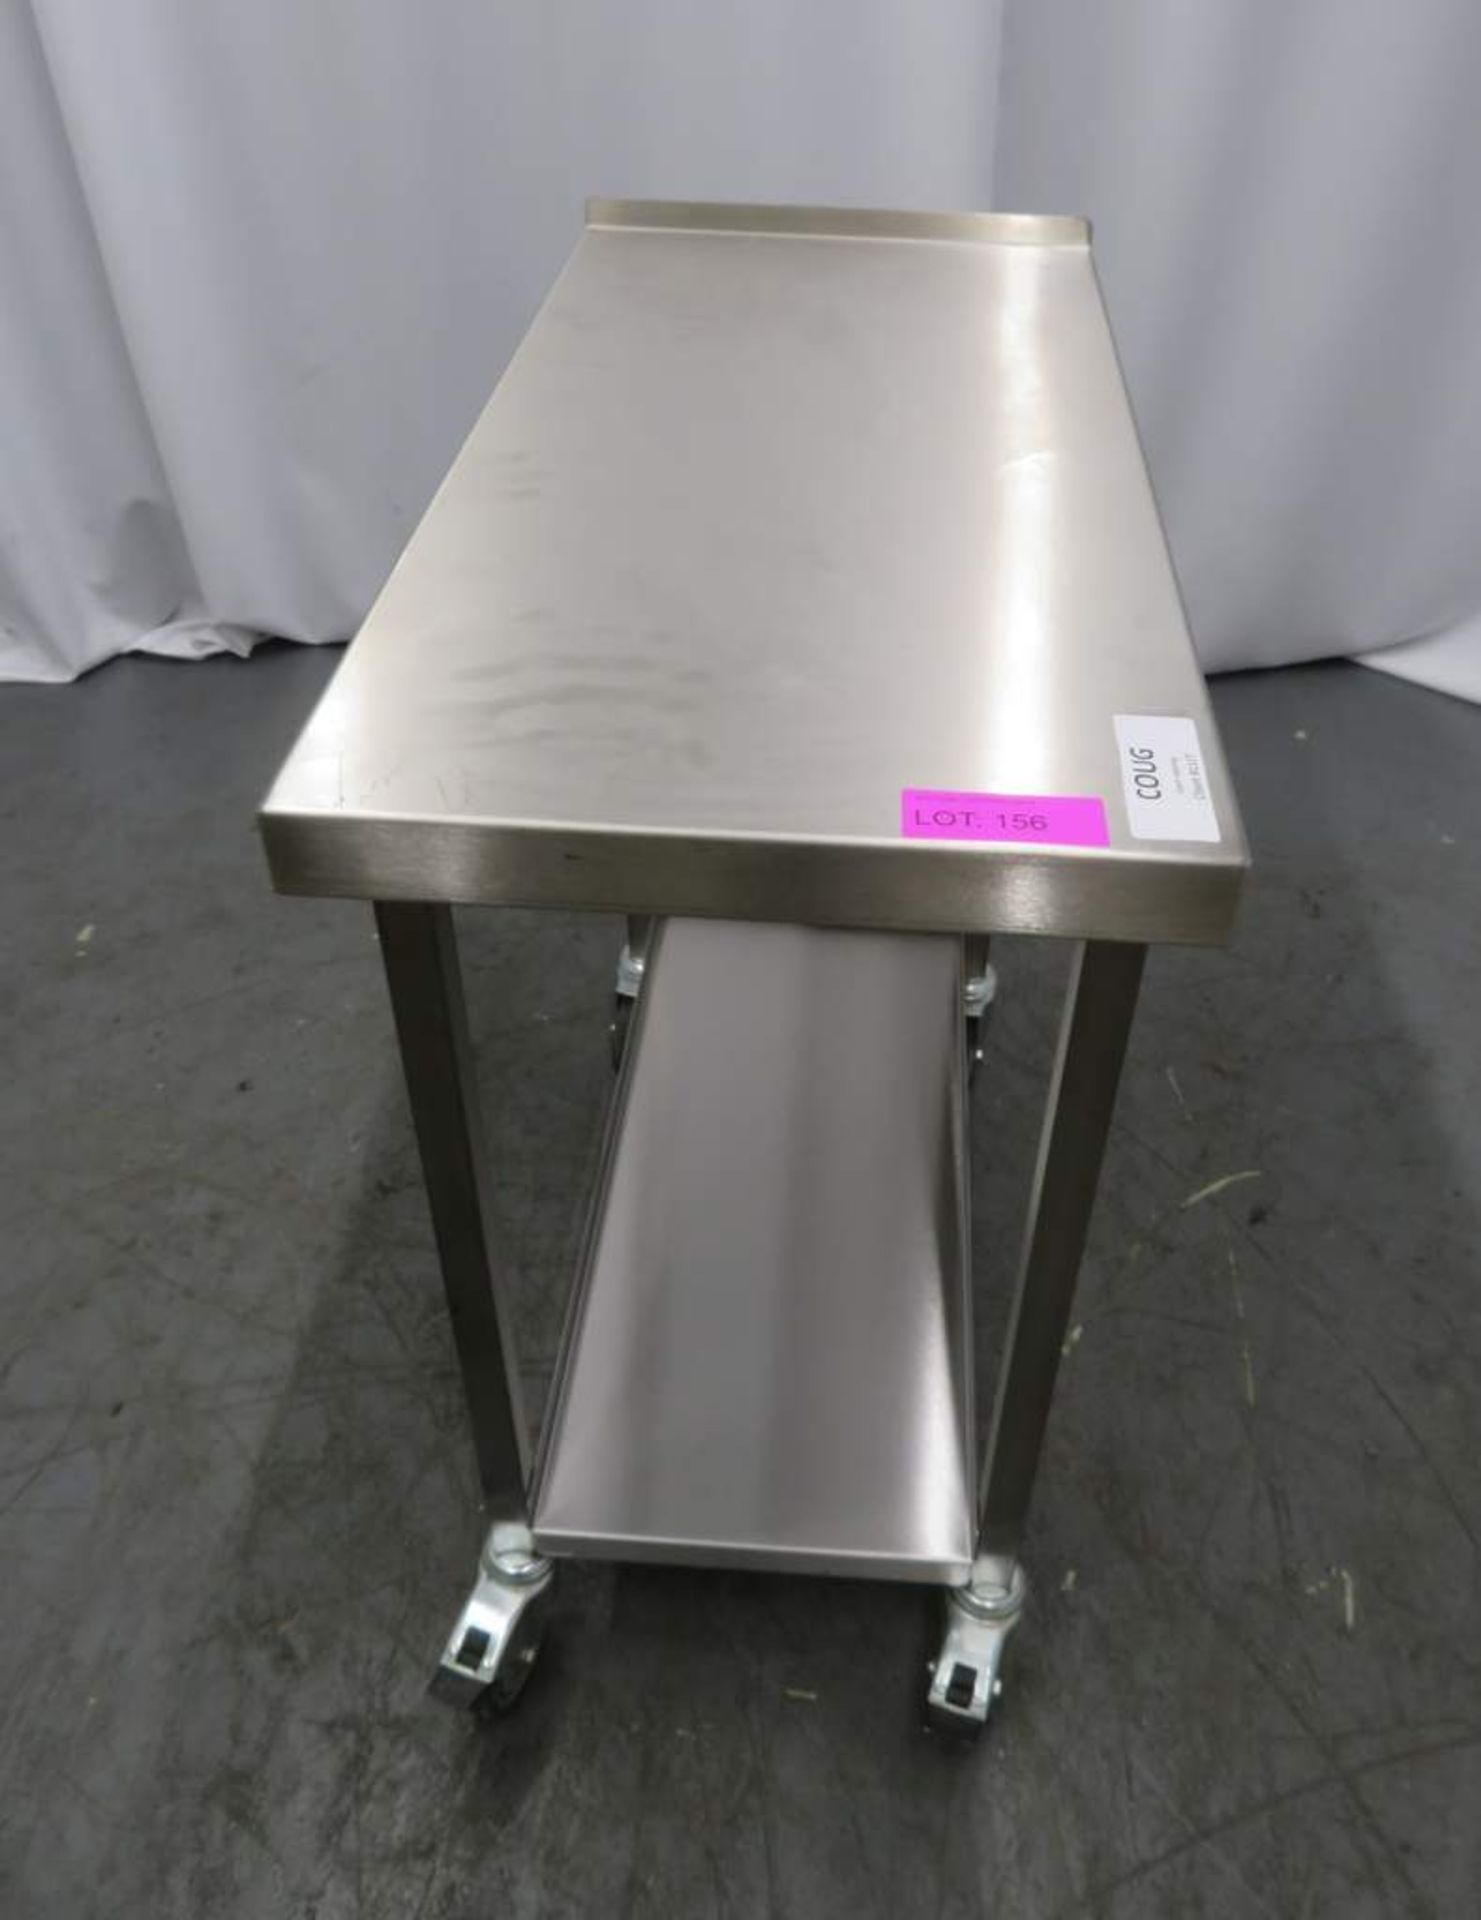 PORTABLE STAINLESS STEEL END KITCHEN PREPERATION TABLE WITH UNDER SHELF - Image 2 of 3